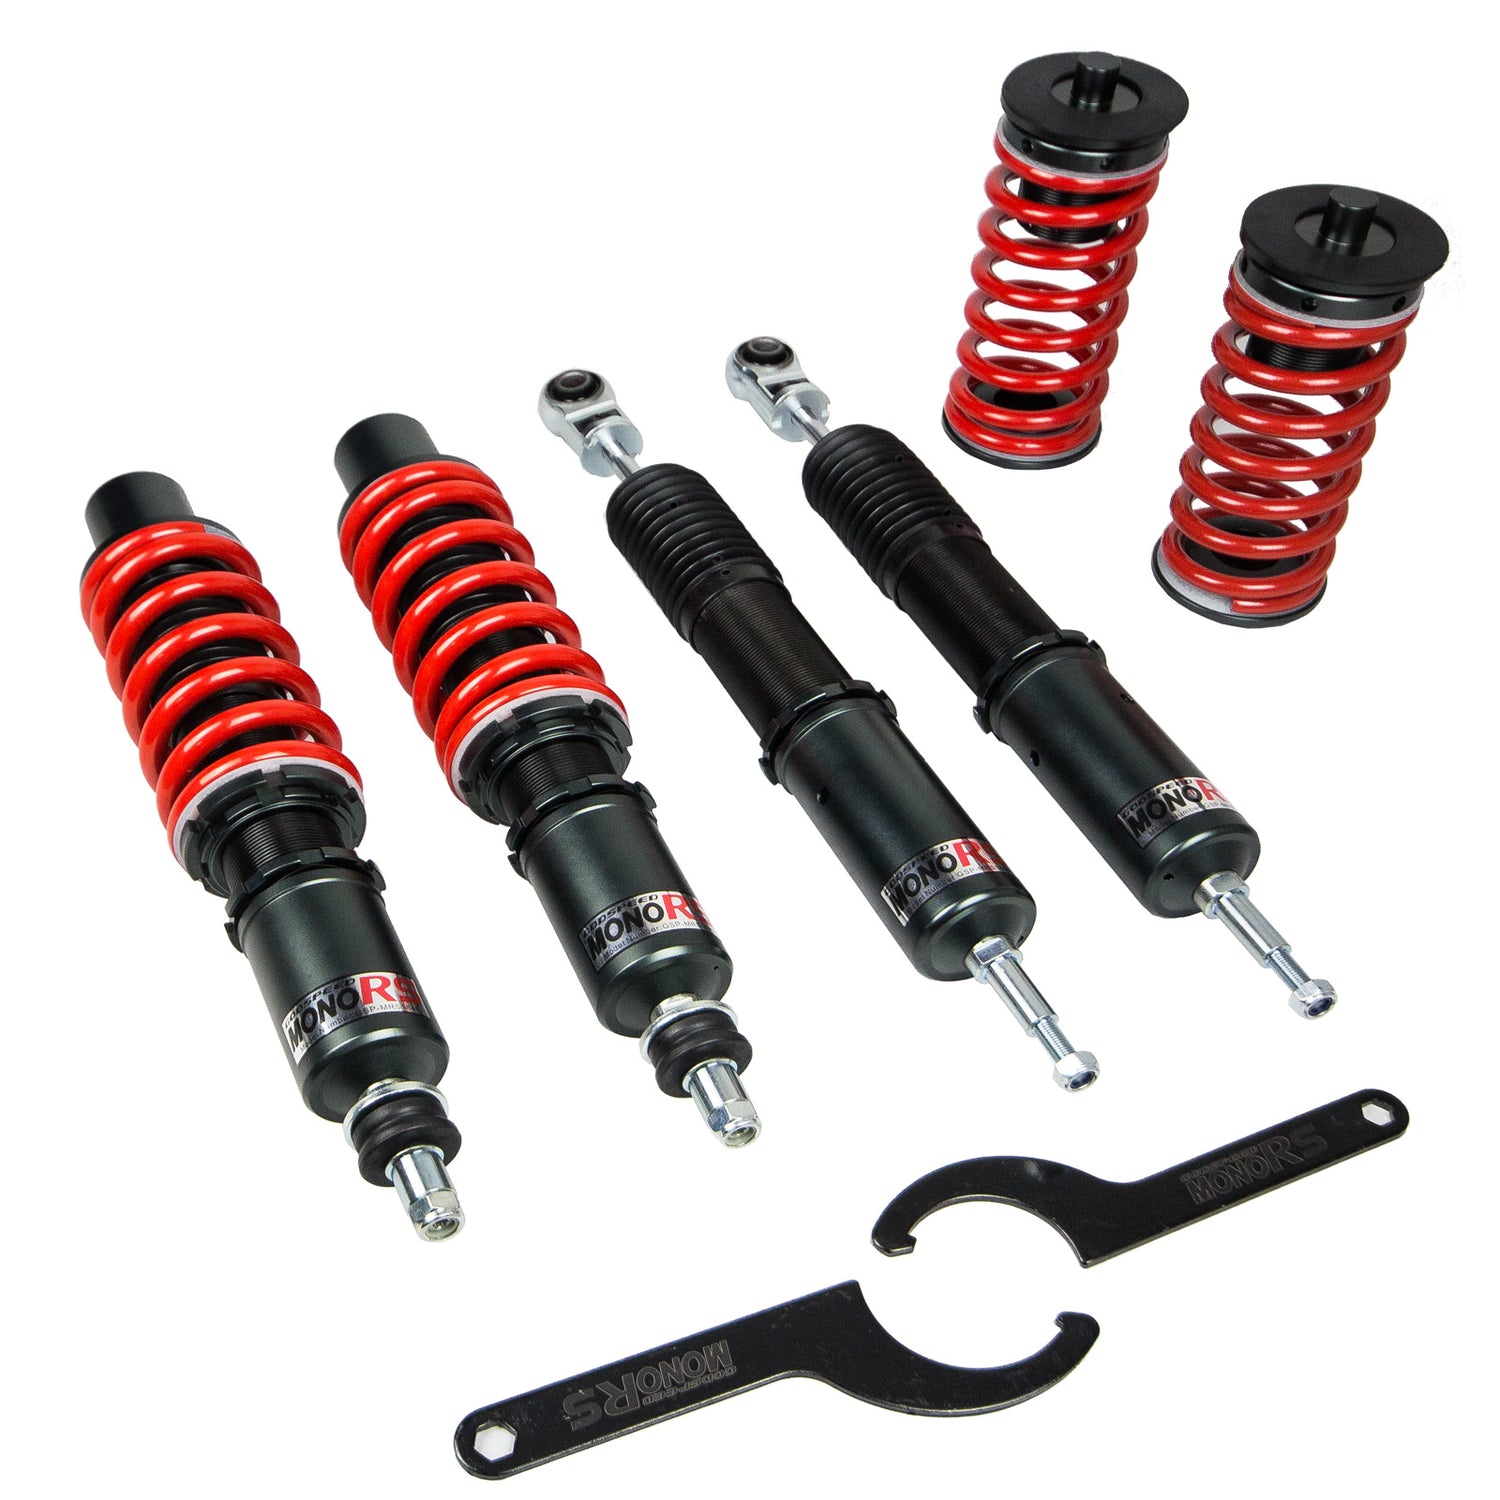 Godspeed MRS1930-A MonoRS Coilover Lowering Kit, 32 Damping Adjustment, Ride Height Adjustable